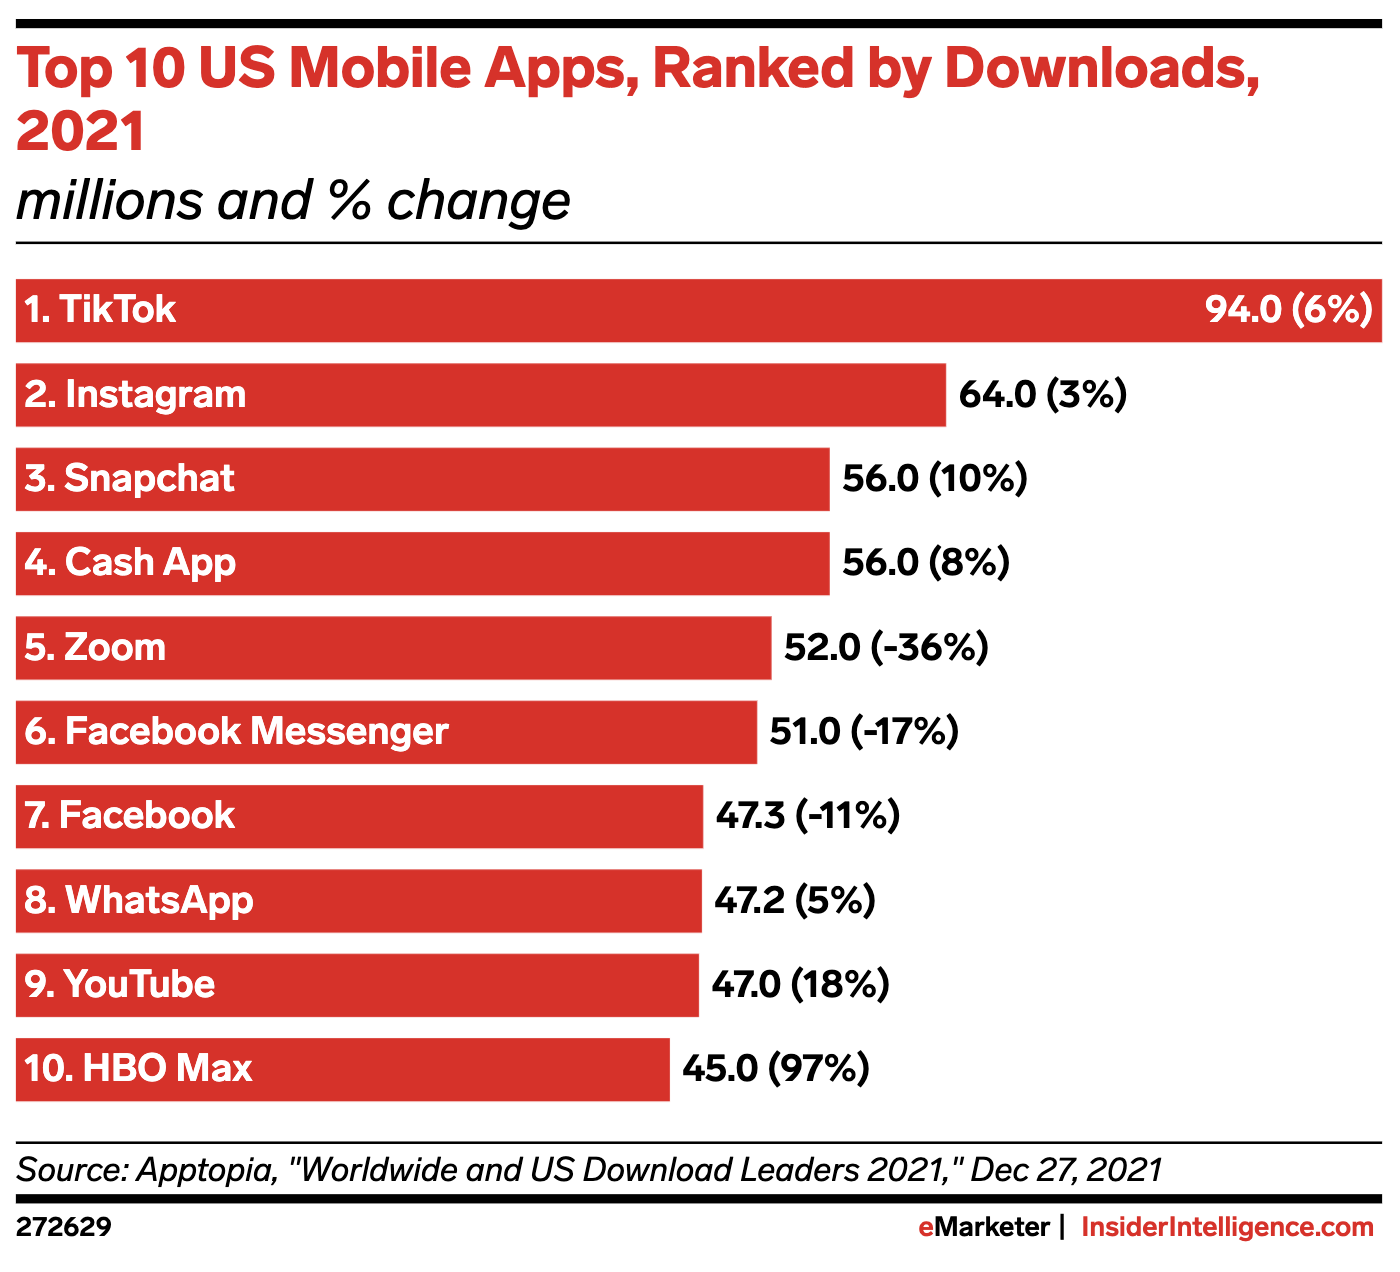 Top 10 US Mobile Apps